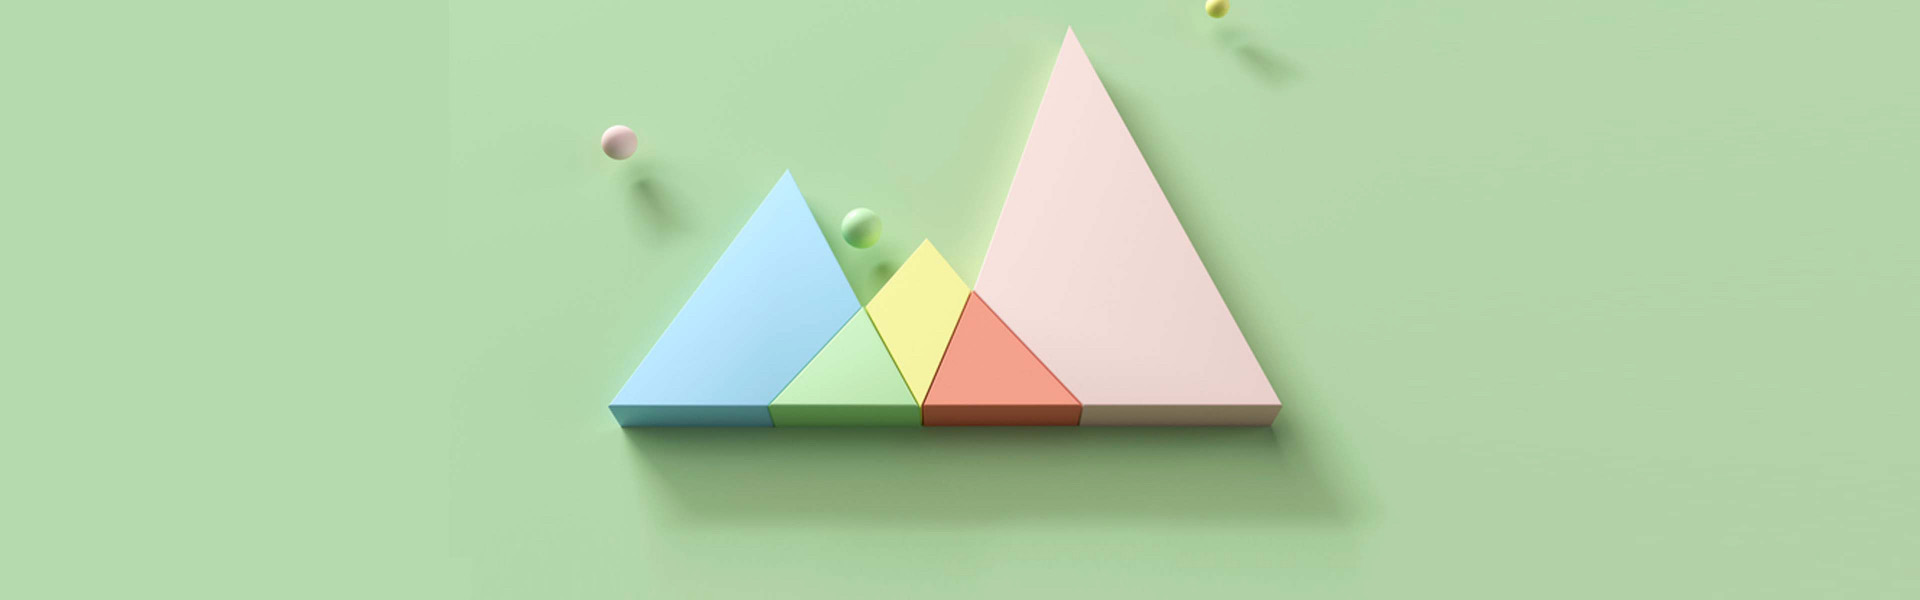 Colorful triangles on a green background with three small spheres.